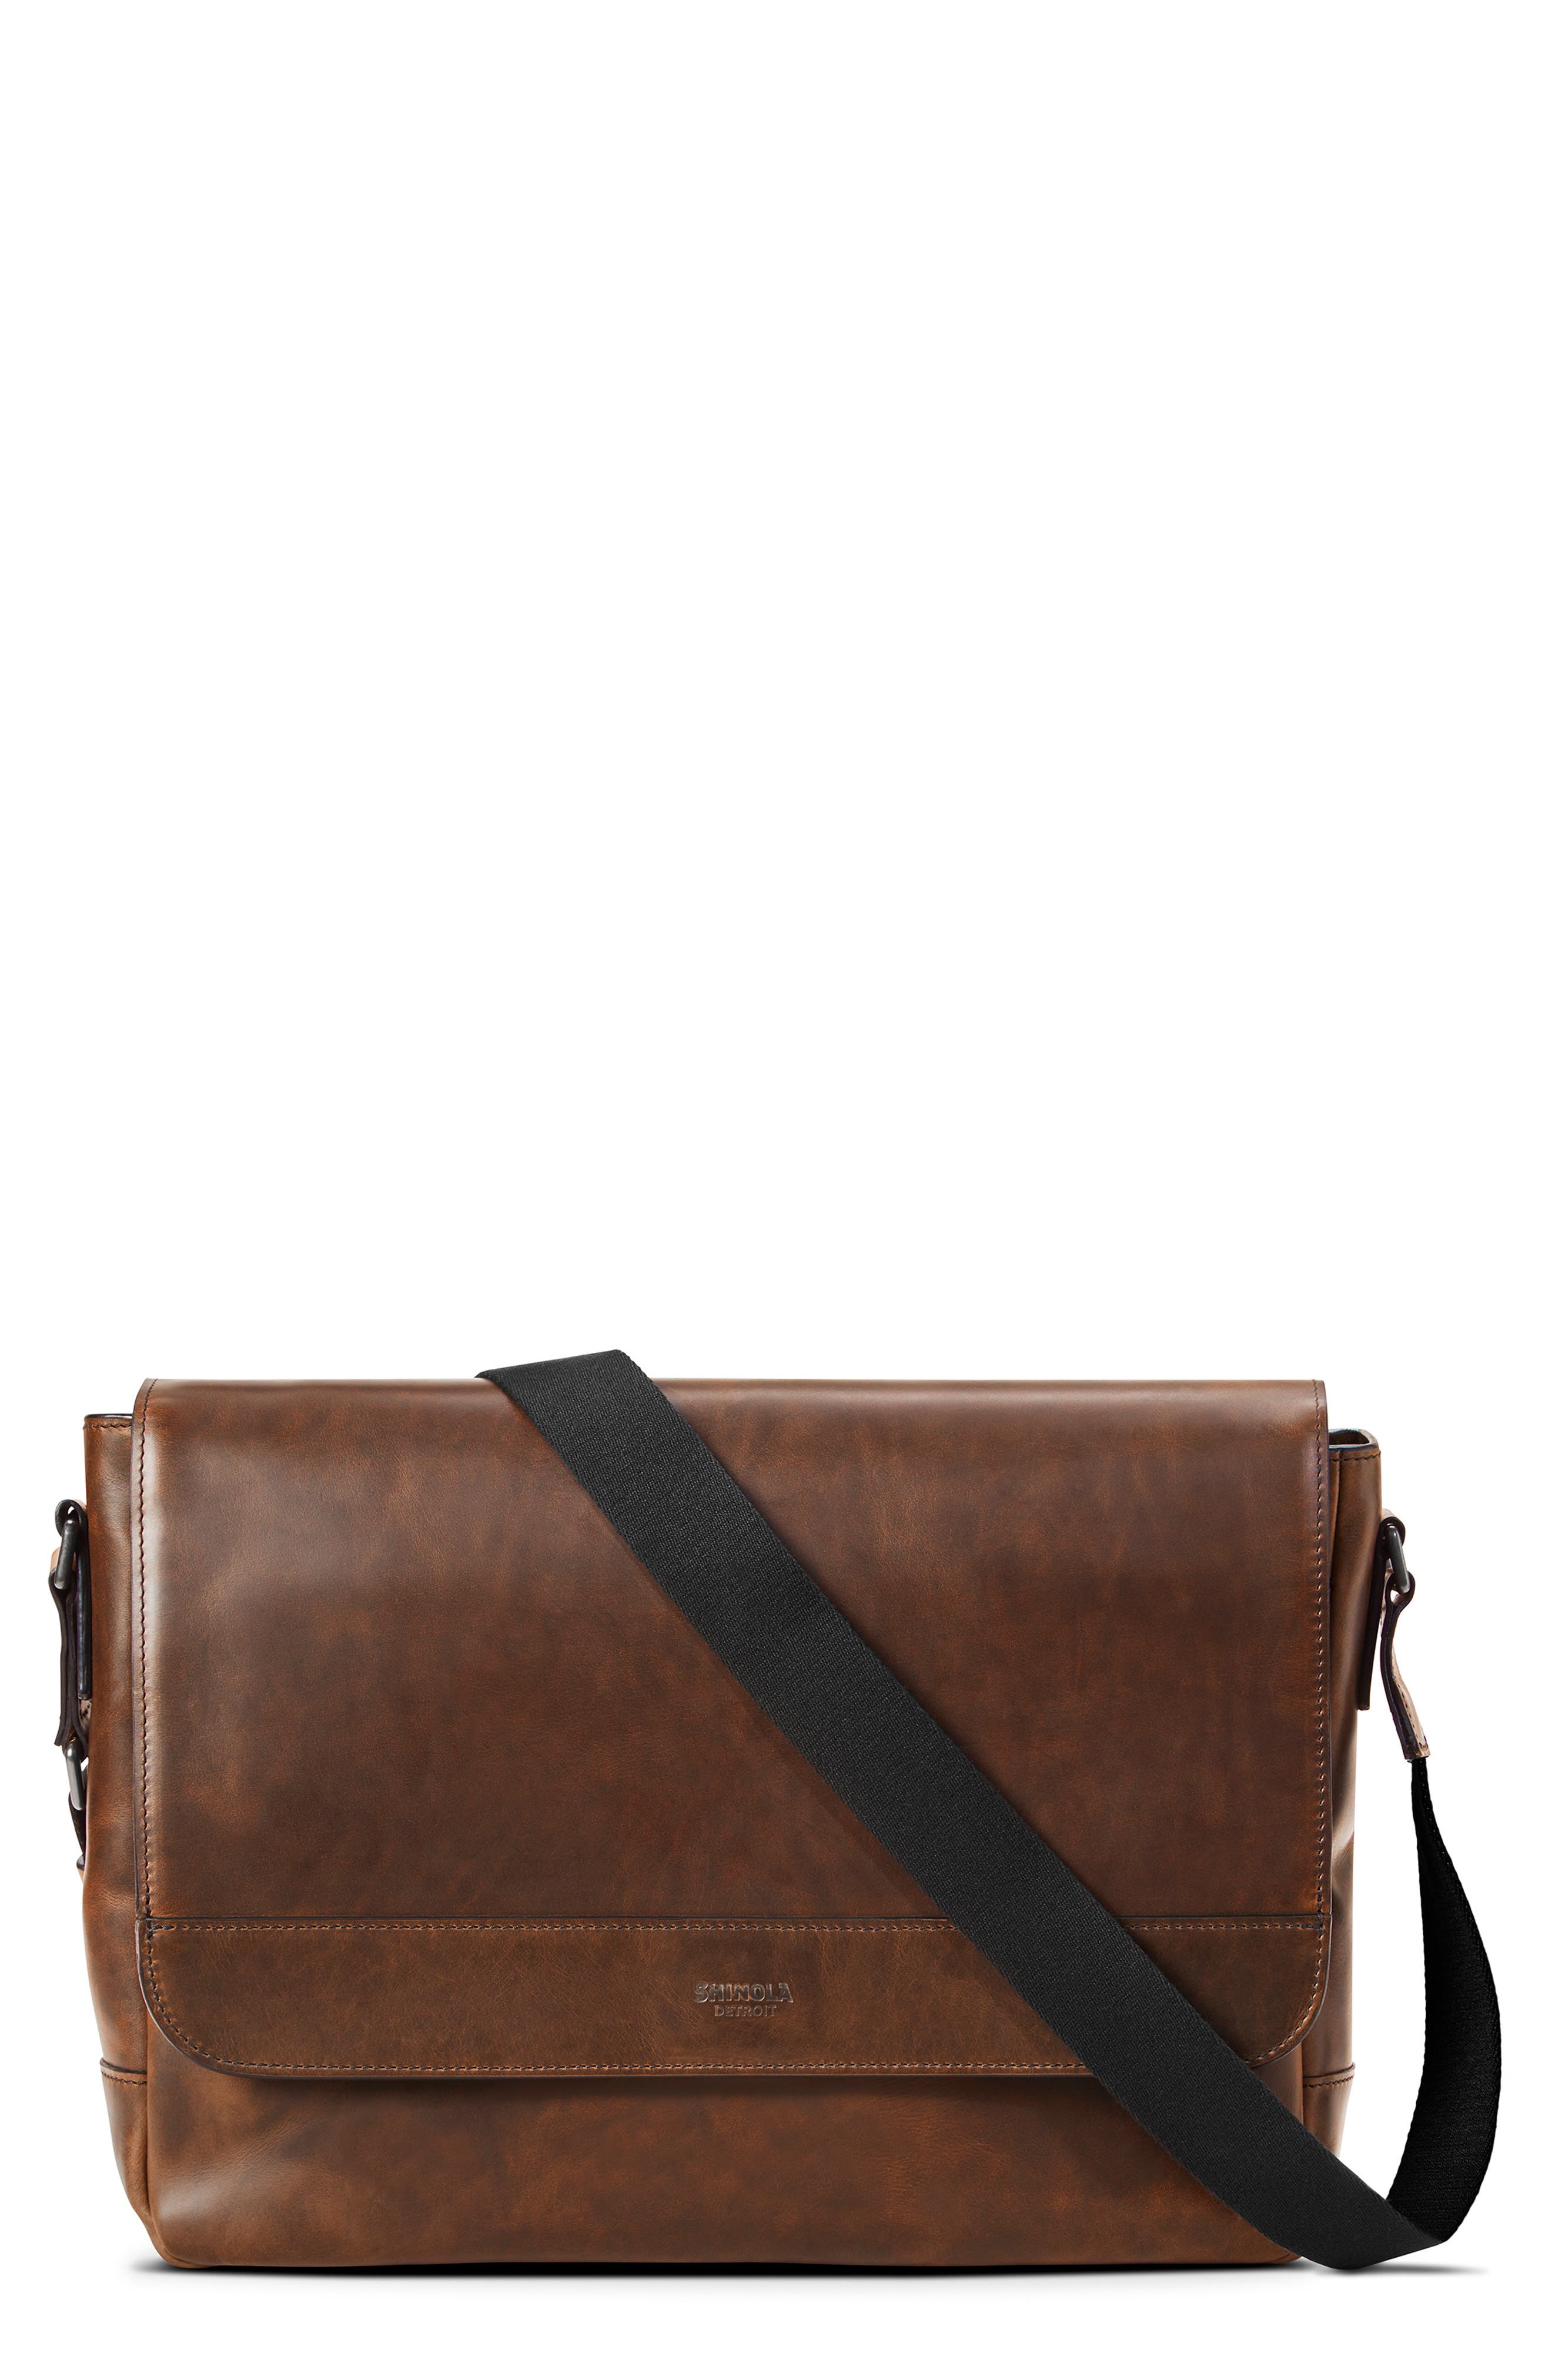 mens leather courier bag